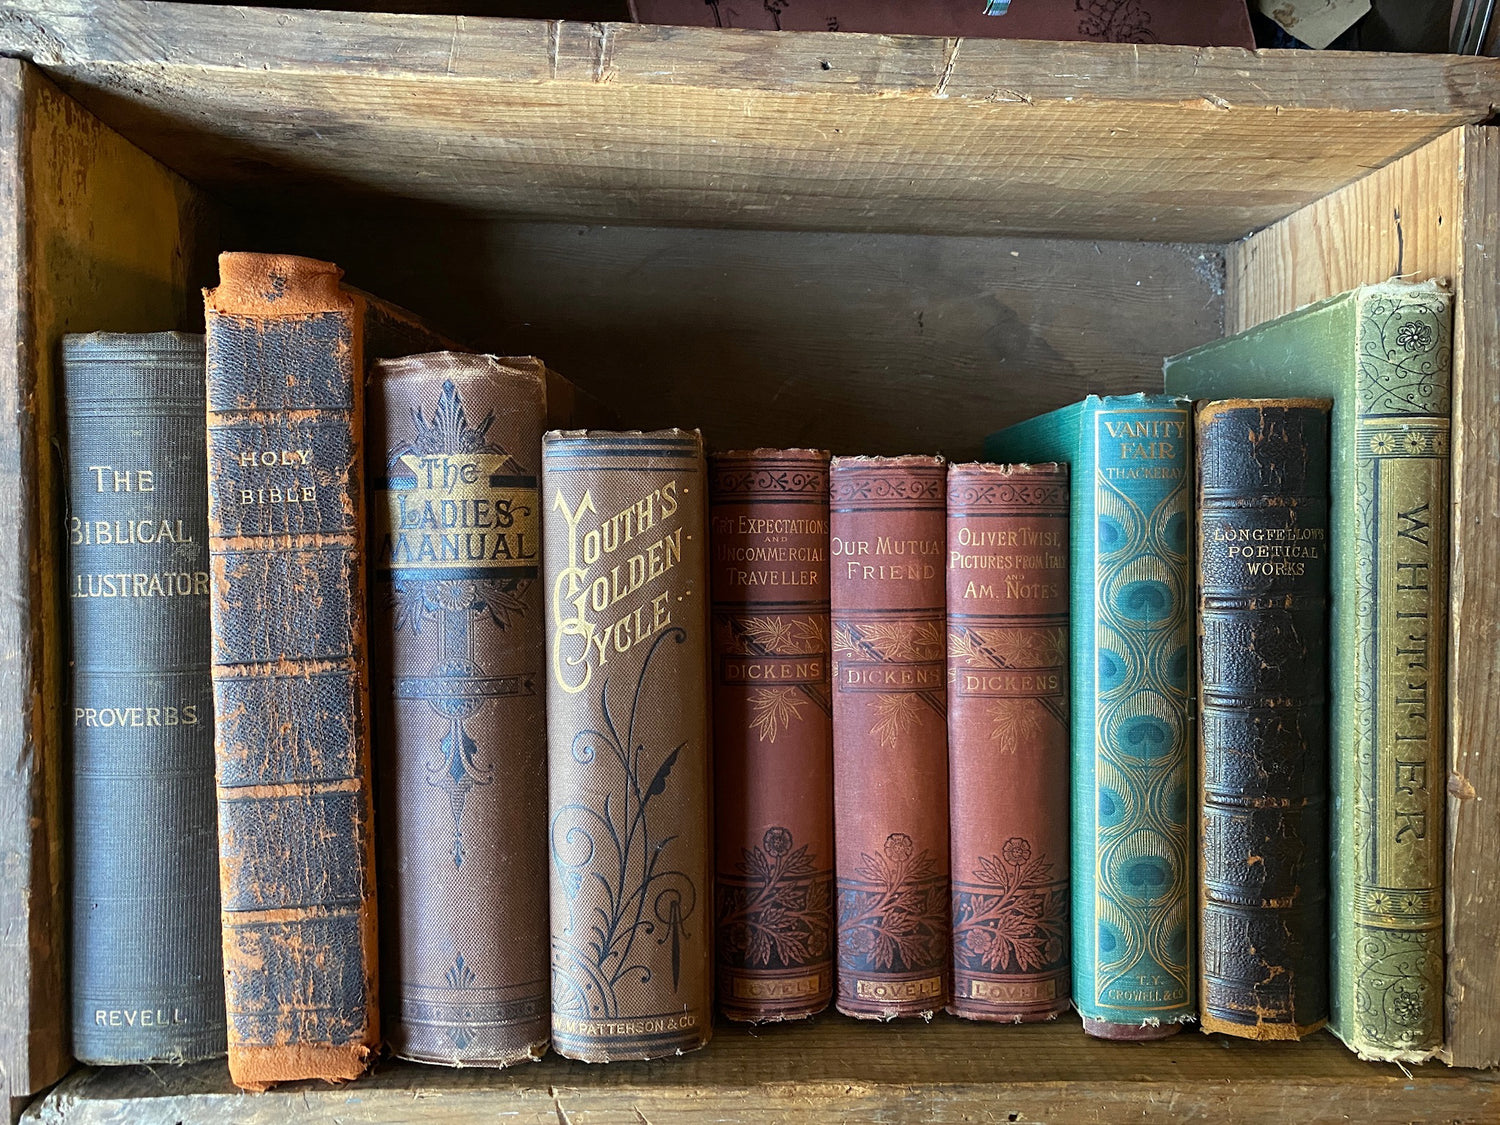 Image features ten timeworn 19th century books standing upright inside an old wooden crate.  